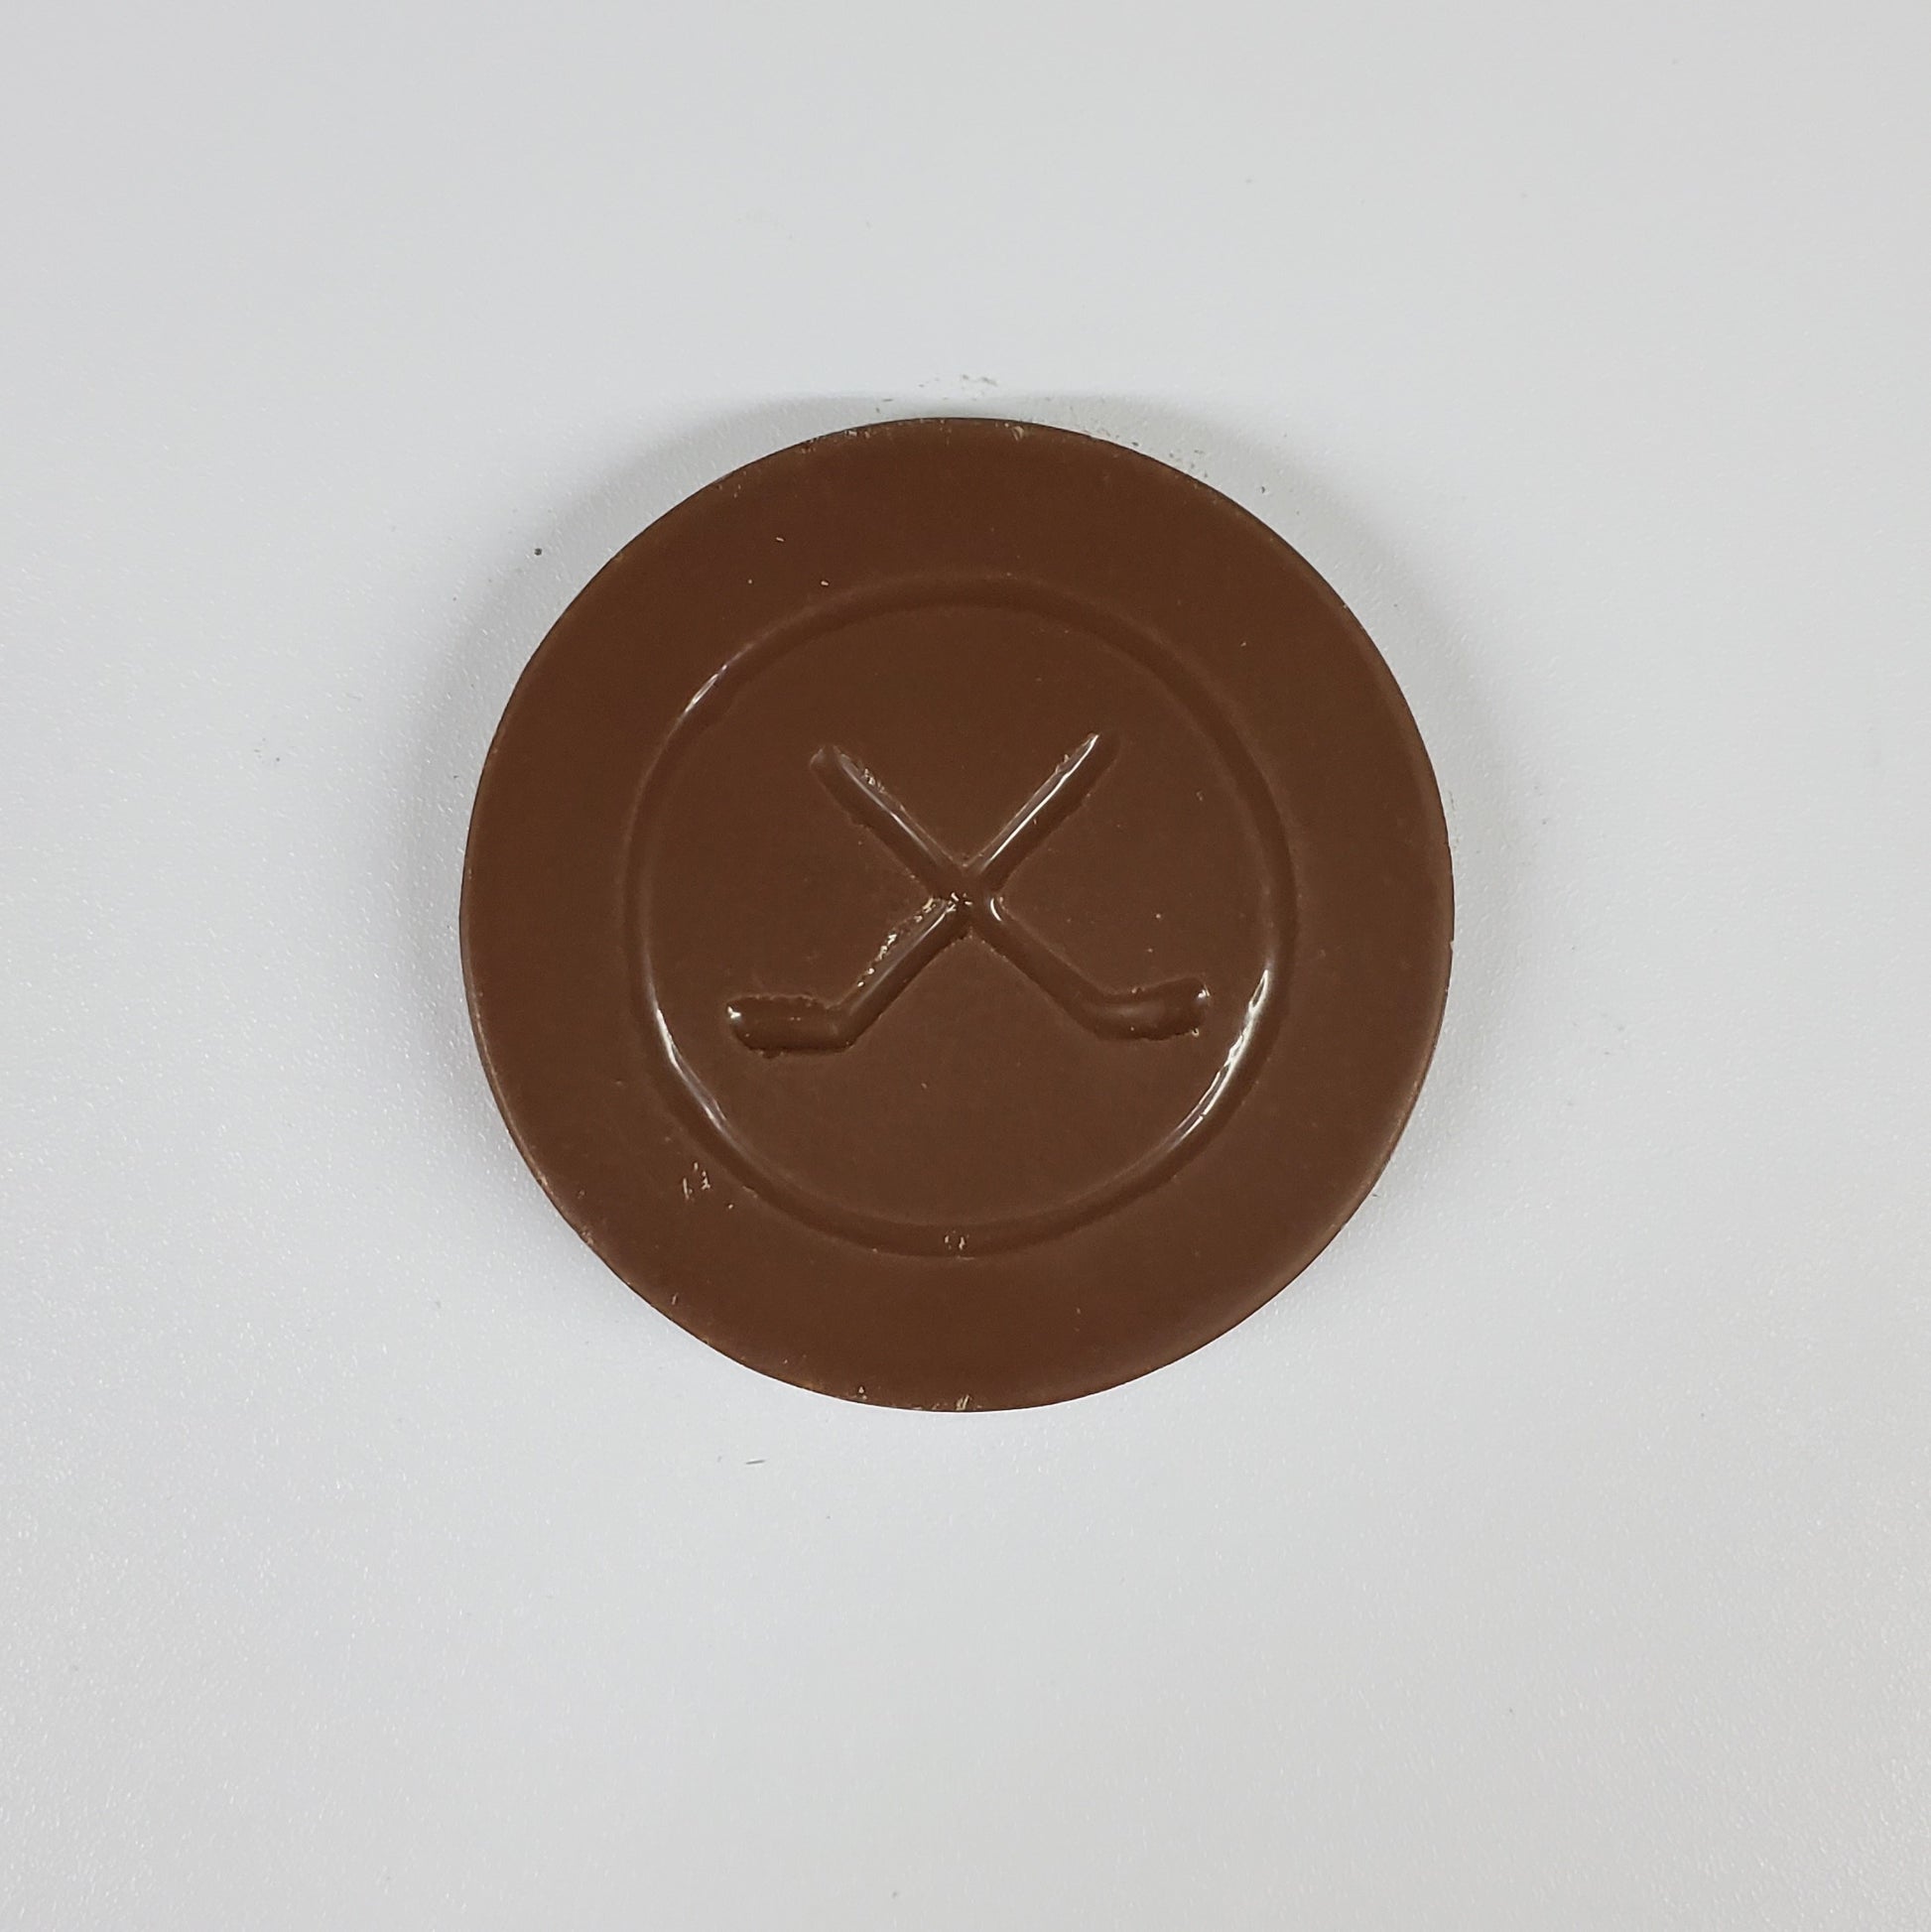 Milk Chocolate in the shape of a hockey puck